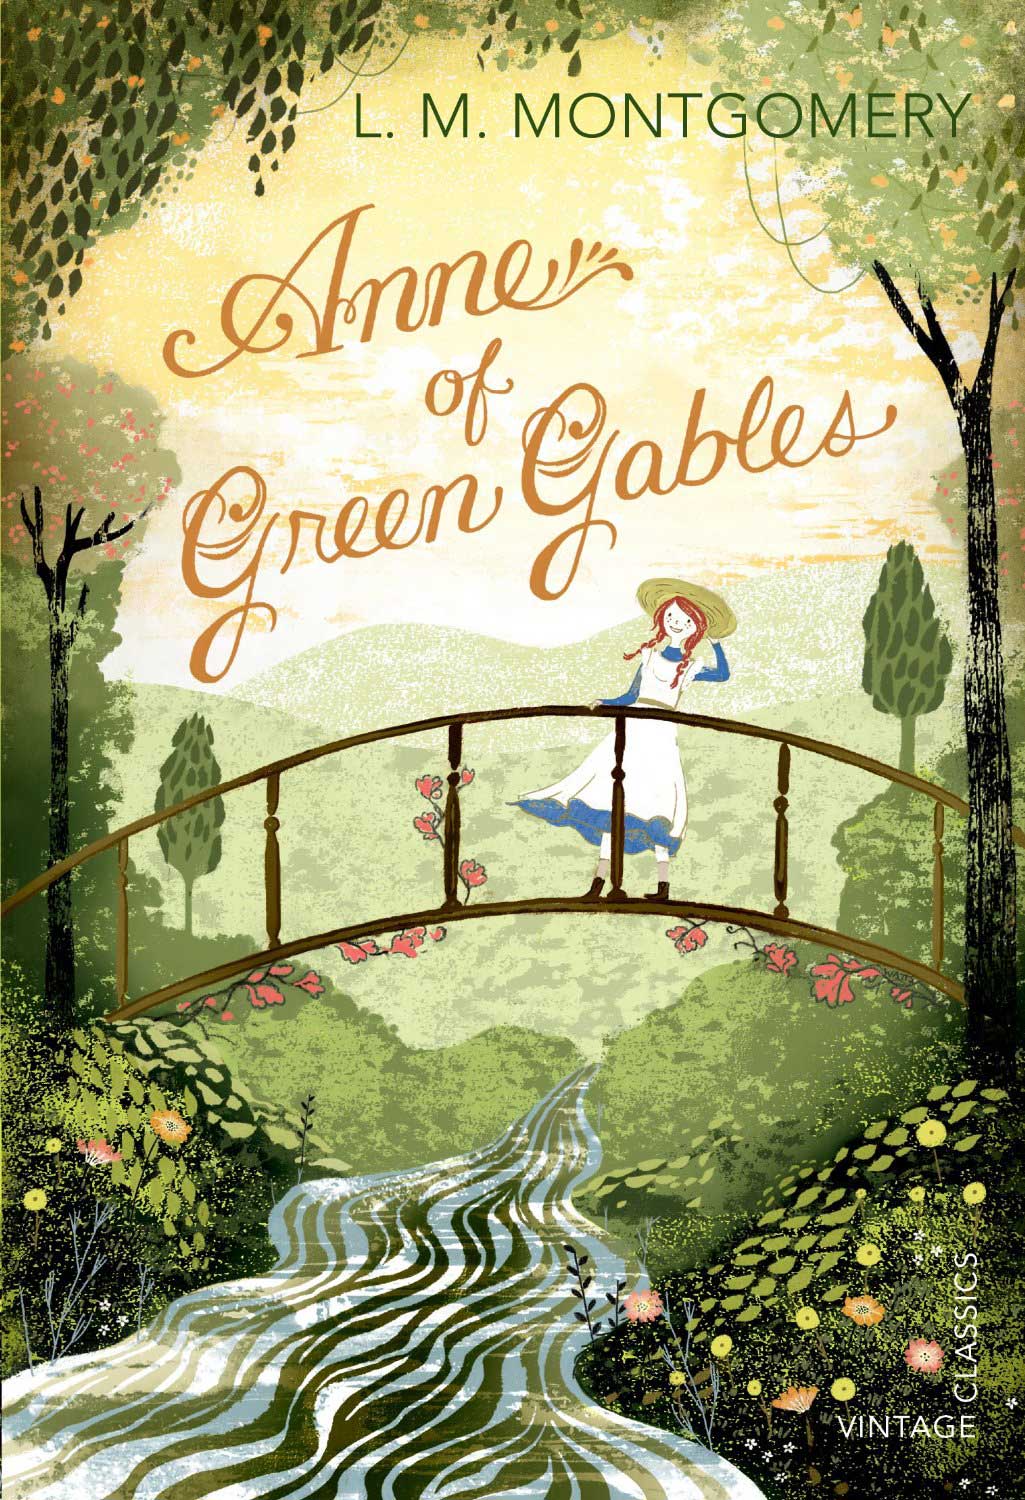 Anne of Green Gables (series), by L.M. Montgomery. 
                              
                              
                              
                              Young spirited Anne moves in with foster parents and adapts to her new home in Green Gables.
                              
                              
                              
                              Buy now: Anne of Green Gables (series)